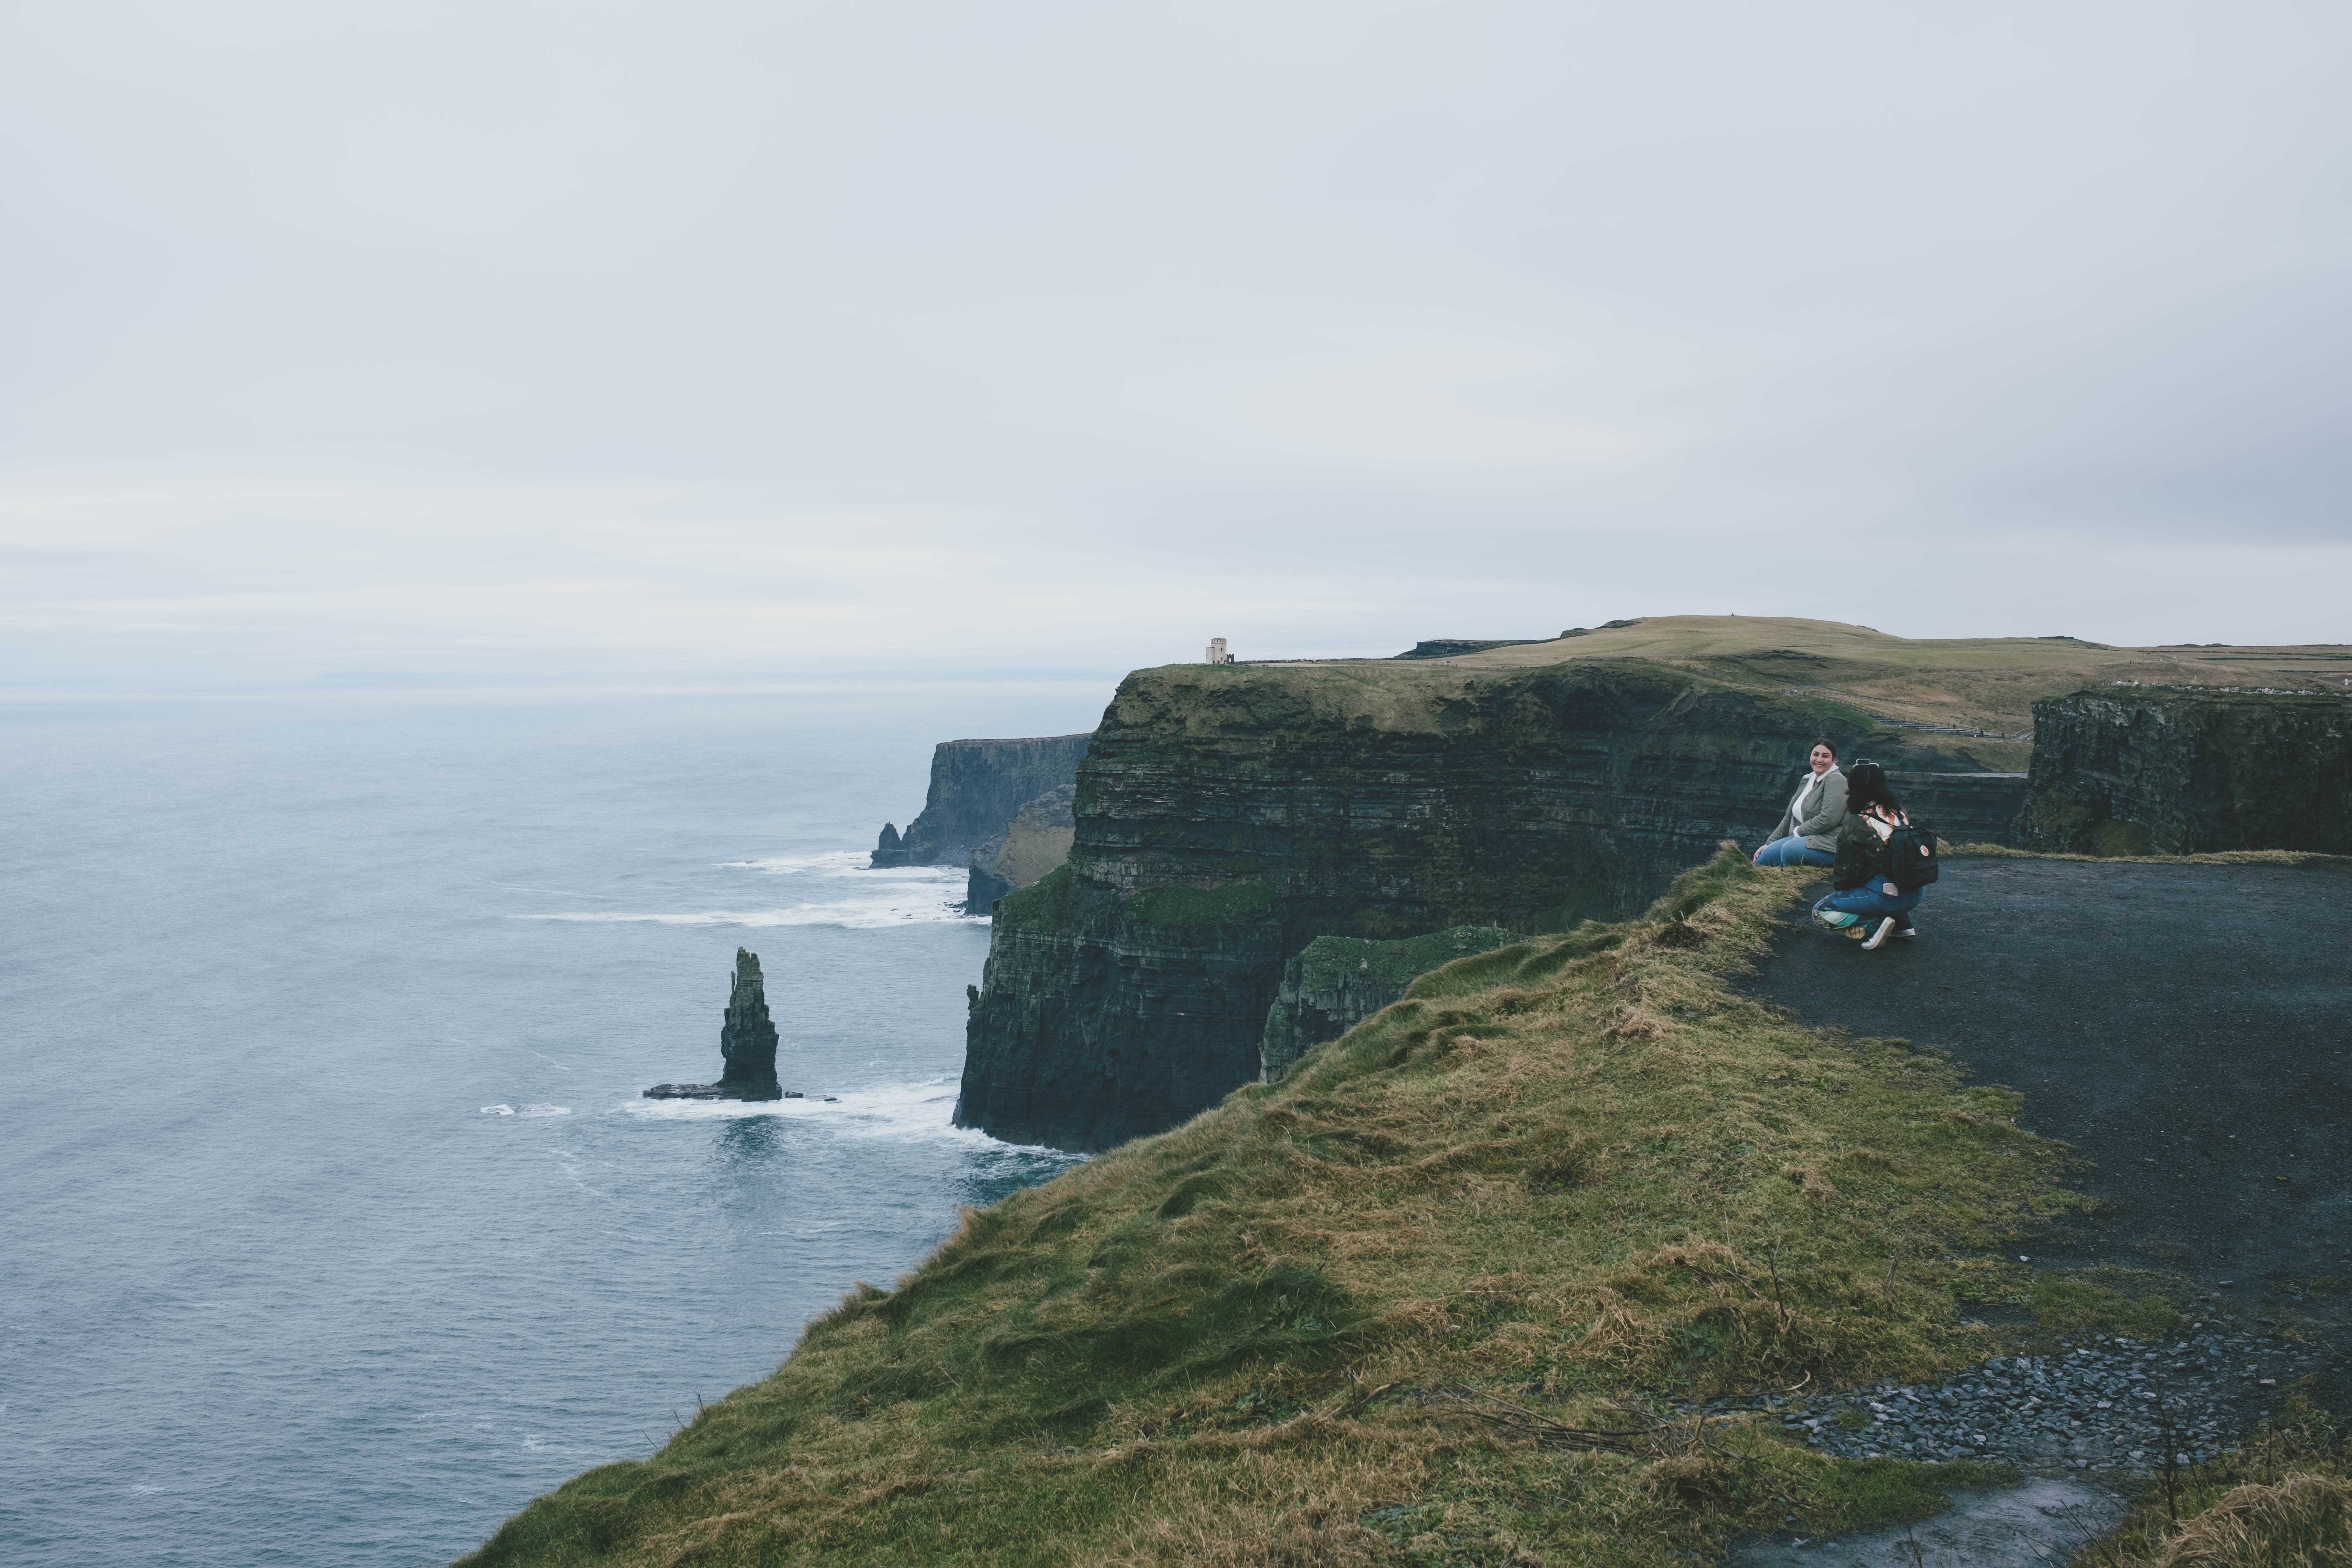 A person posing for a photograph sitting at the edge of the cliff